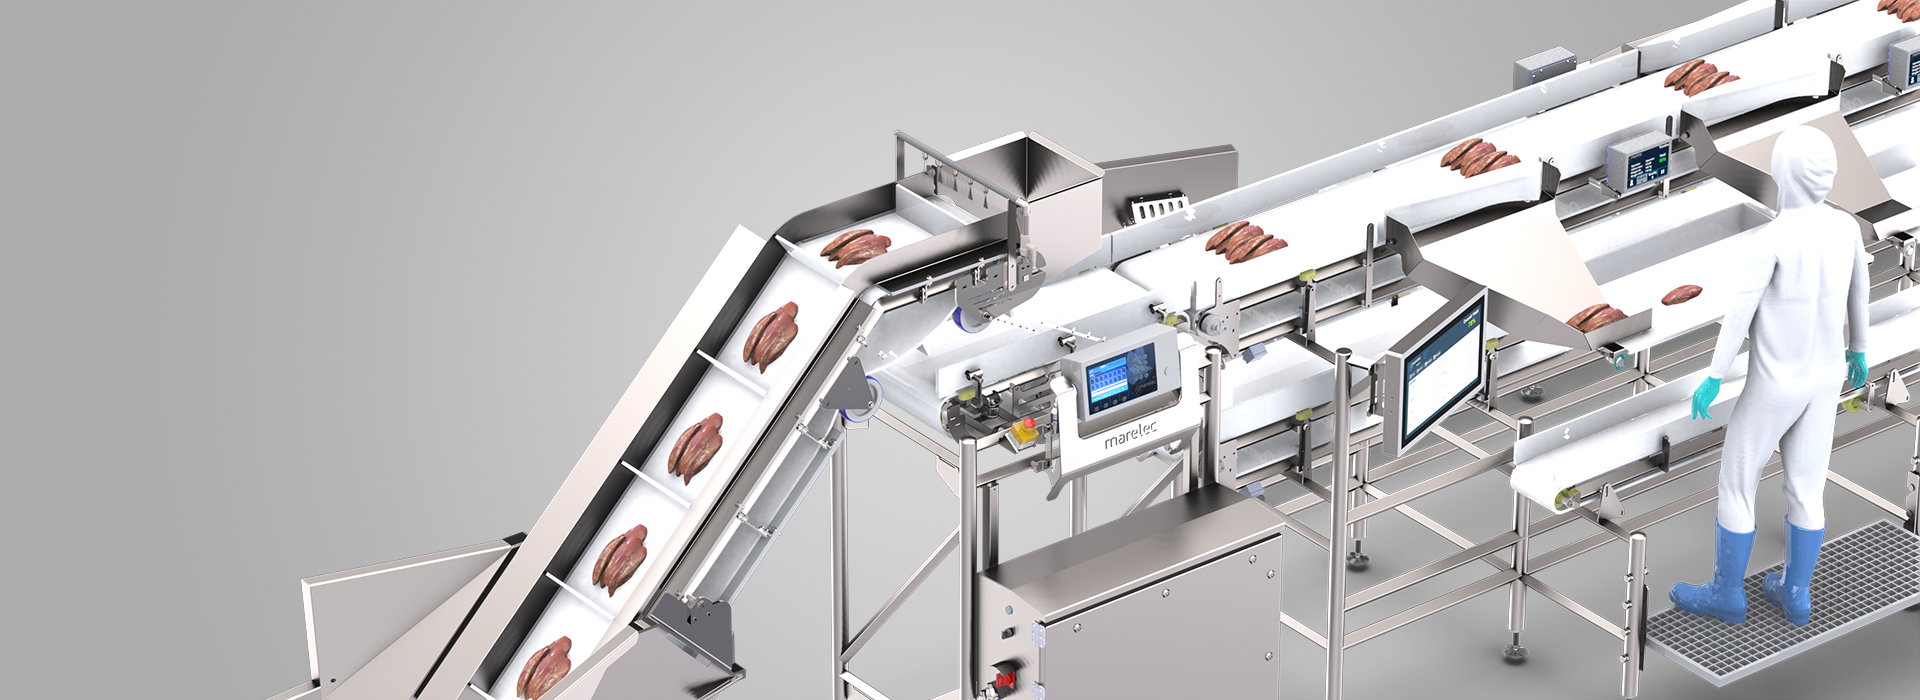 Intelligent poultry trim line monitoring live yield, capacity, and quality per operator